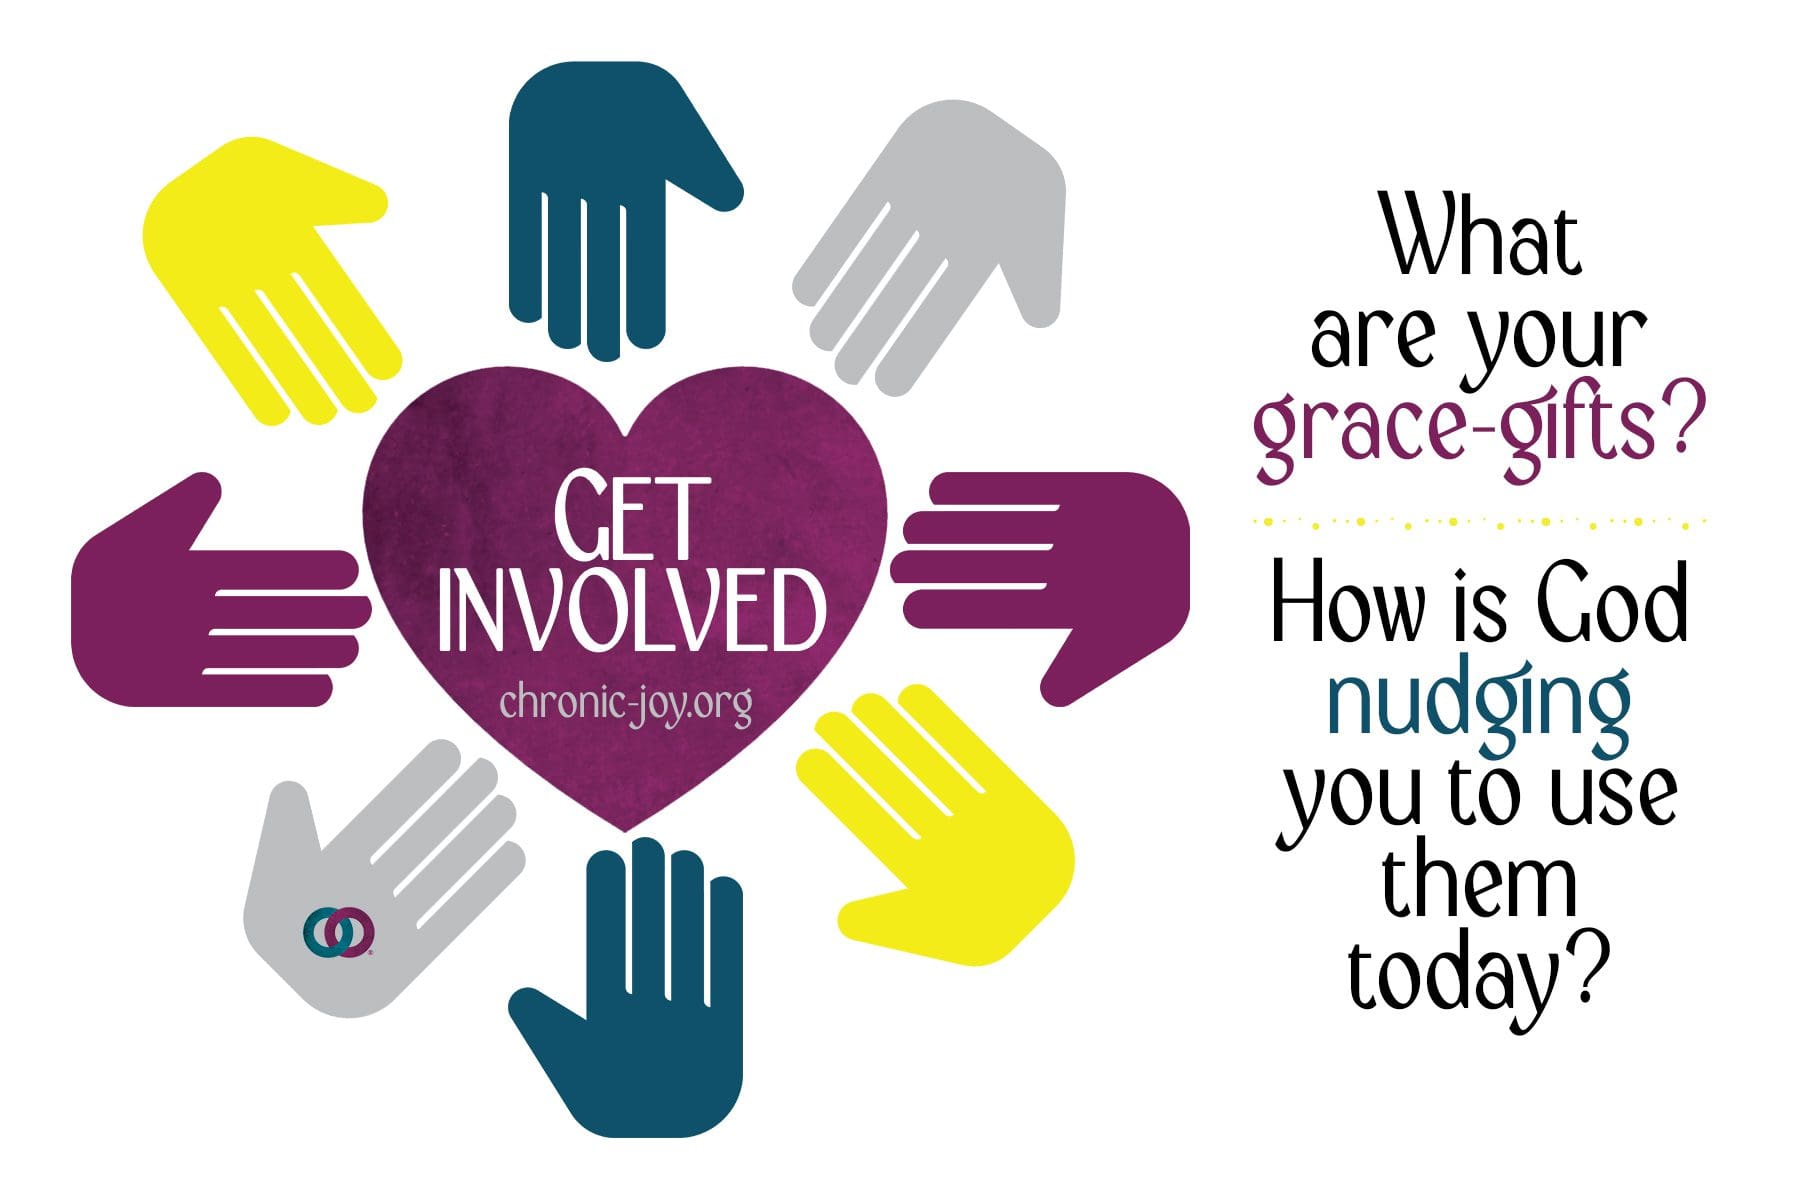 Get Involved • What are your grace-gifts? How is God nudging you to use them today? Get Involved!